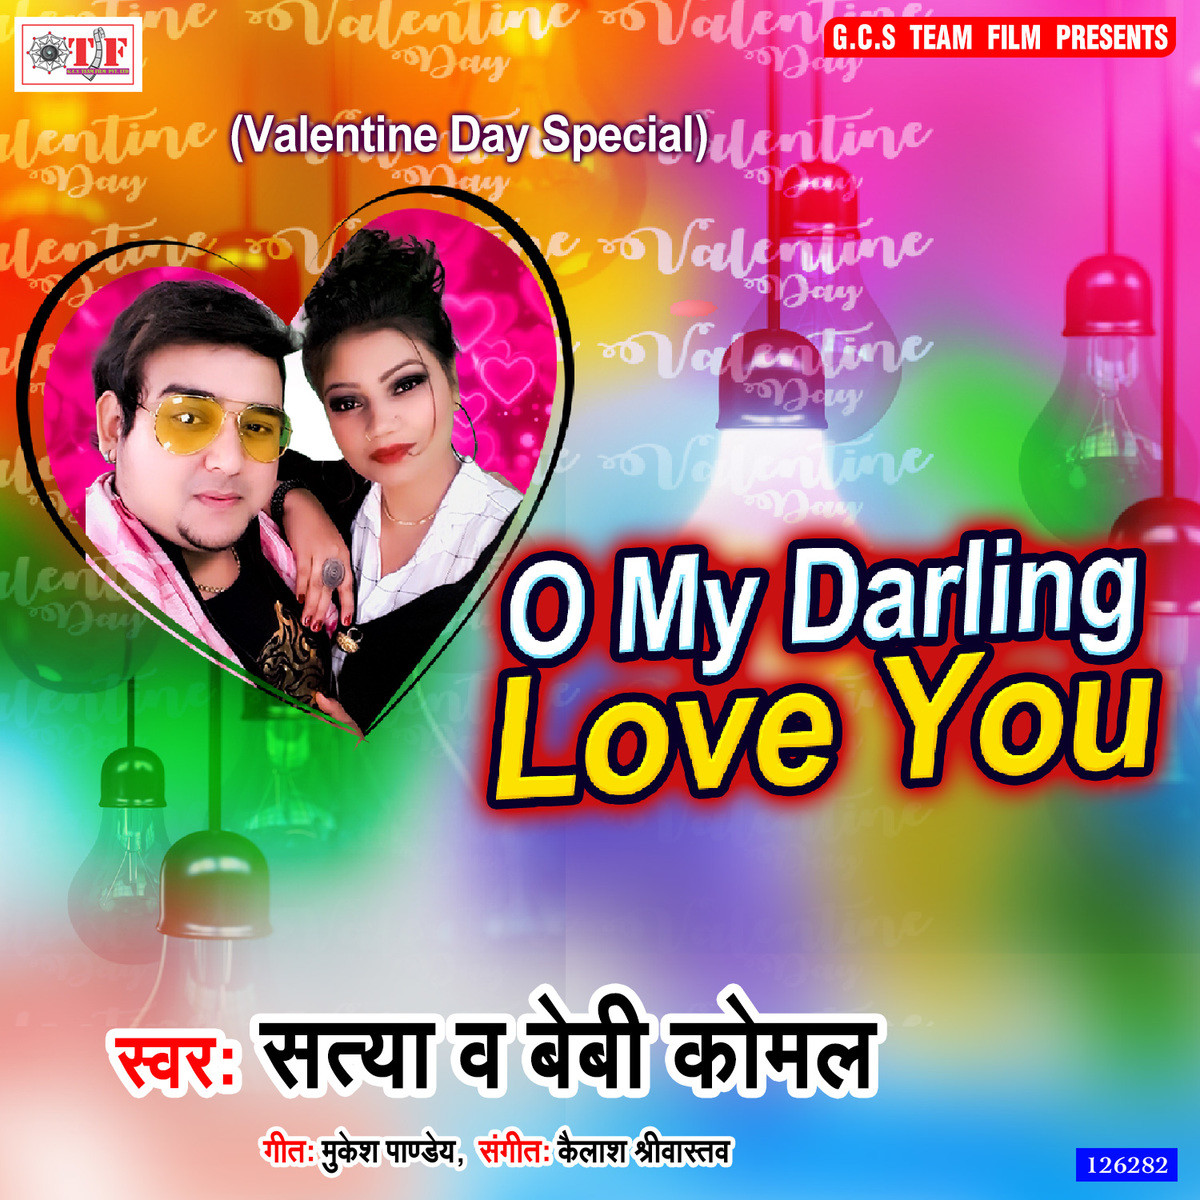 O My Darling Love You Song Download O My Darling Love You Mp3 Bhojpuri Song Online Free On Gaana Com